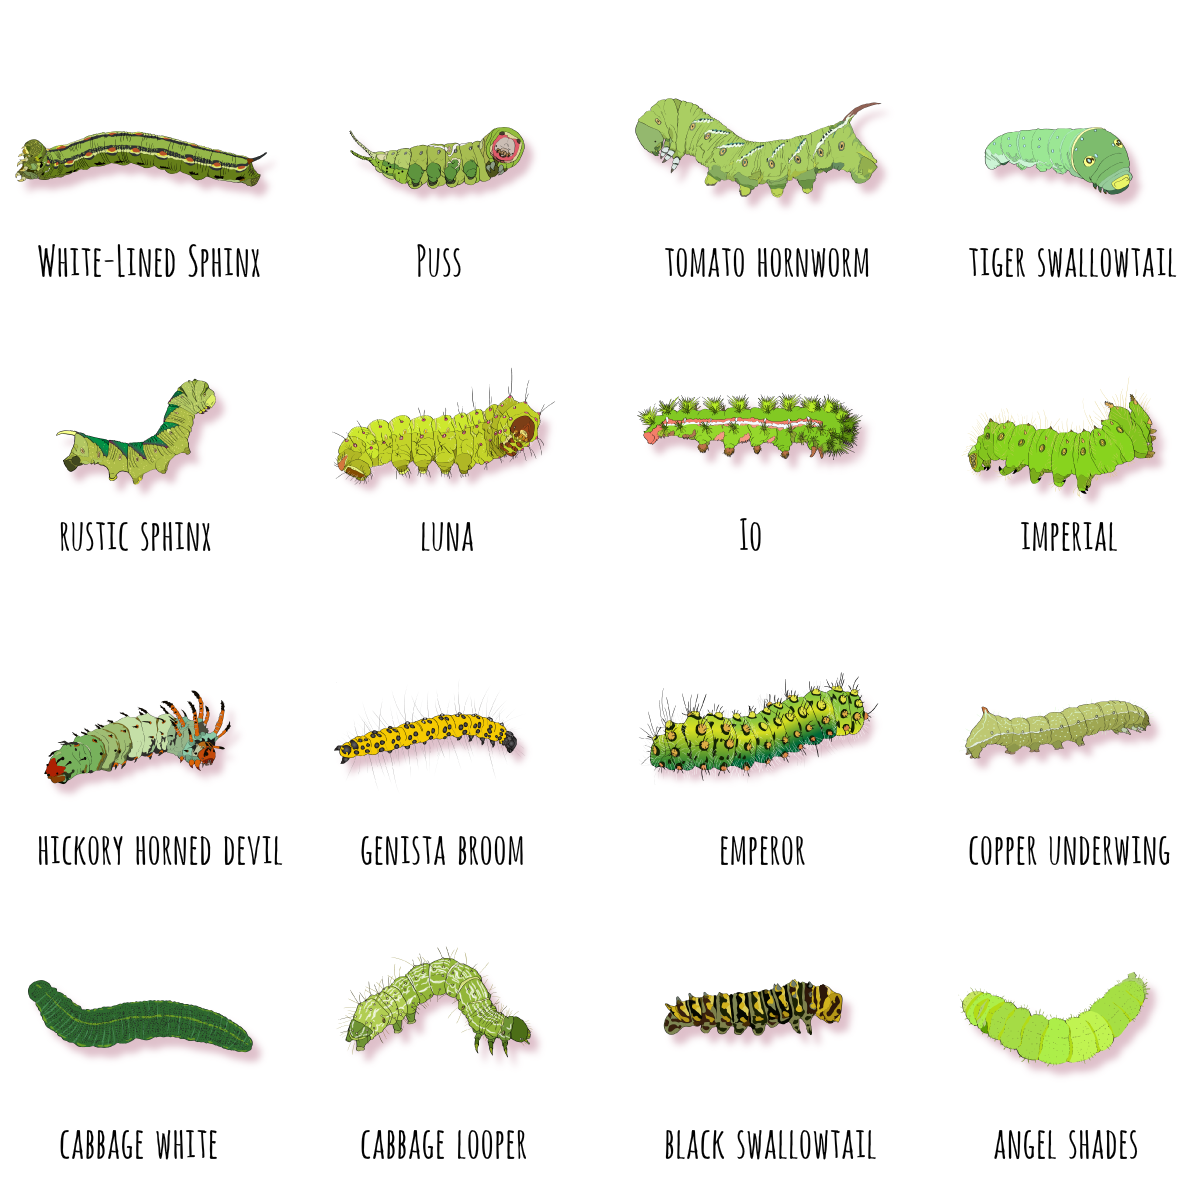 Each of these 16 caterpillars will develop into a moth or butterfly of the same name.